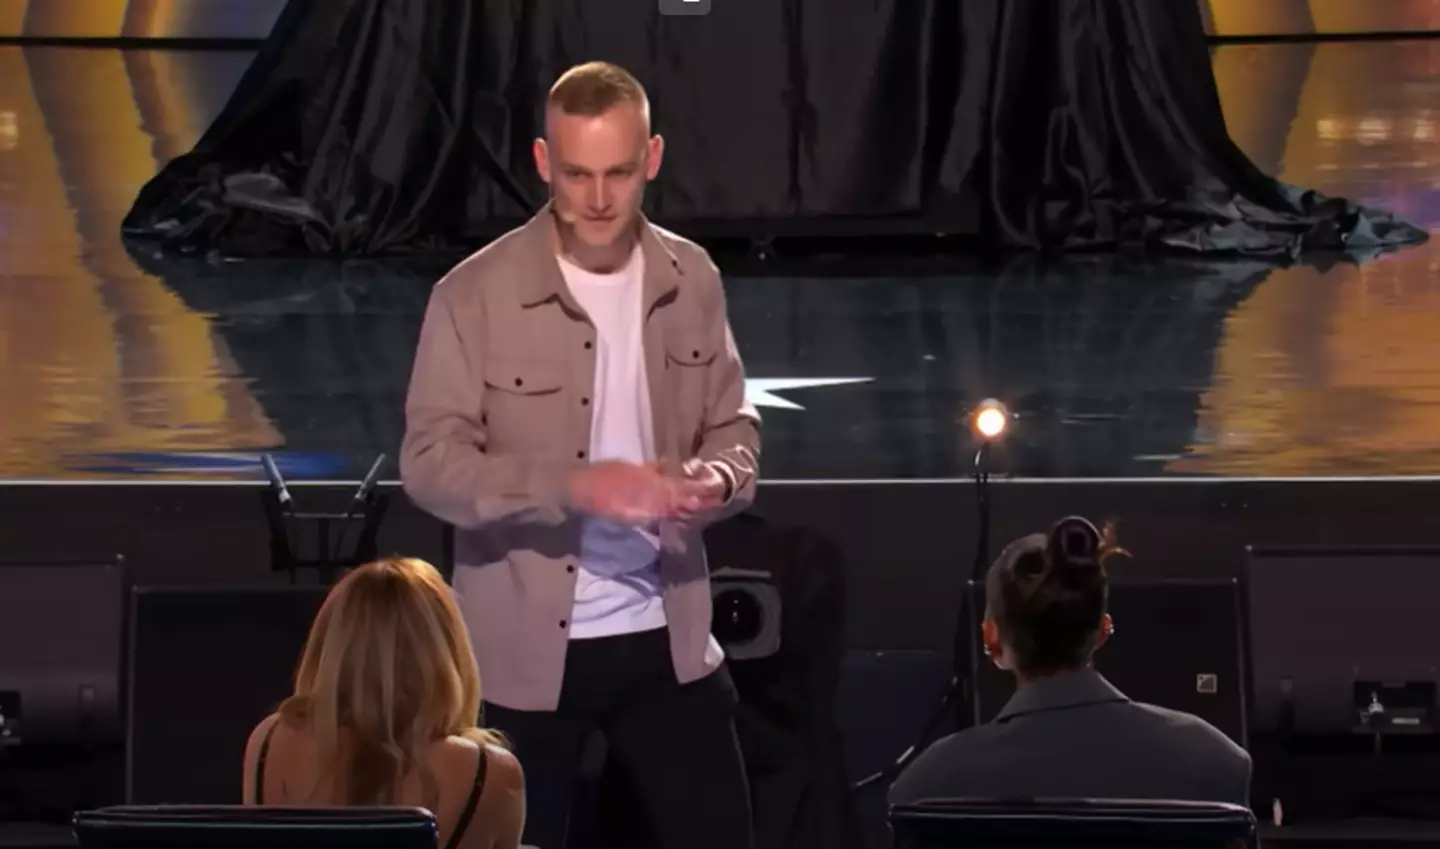 BGT fans think they've cracked Rhoades' card trick. (ITV)